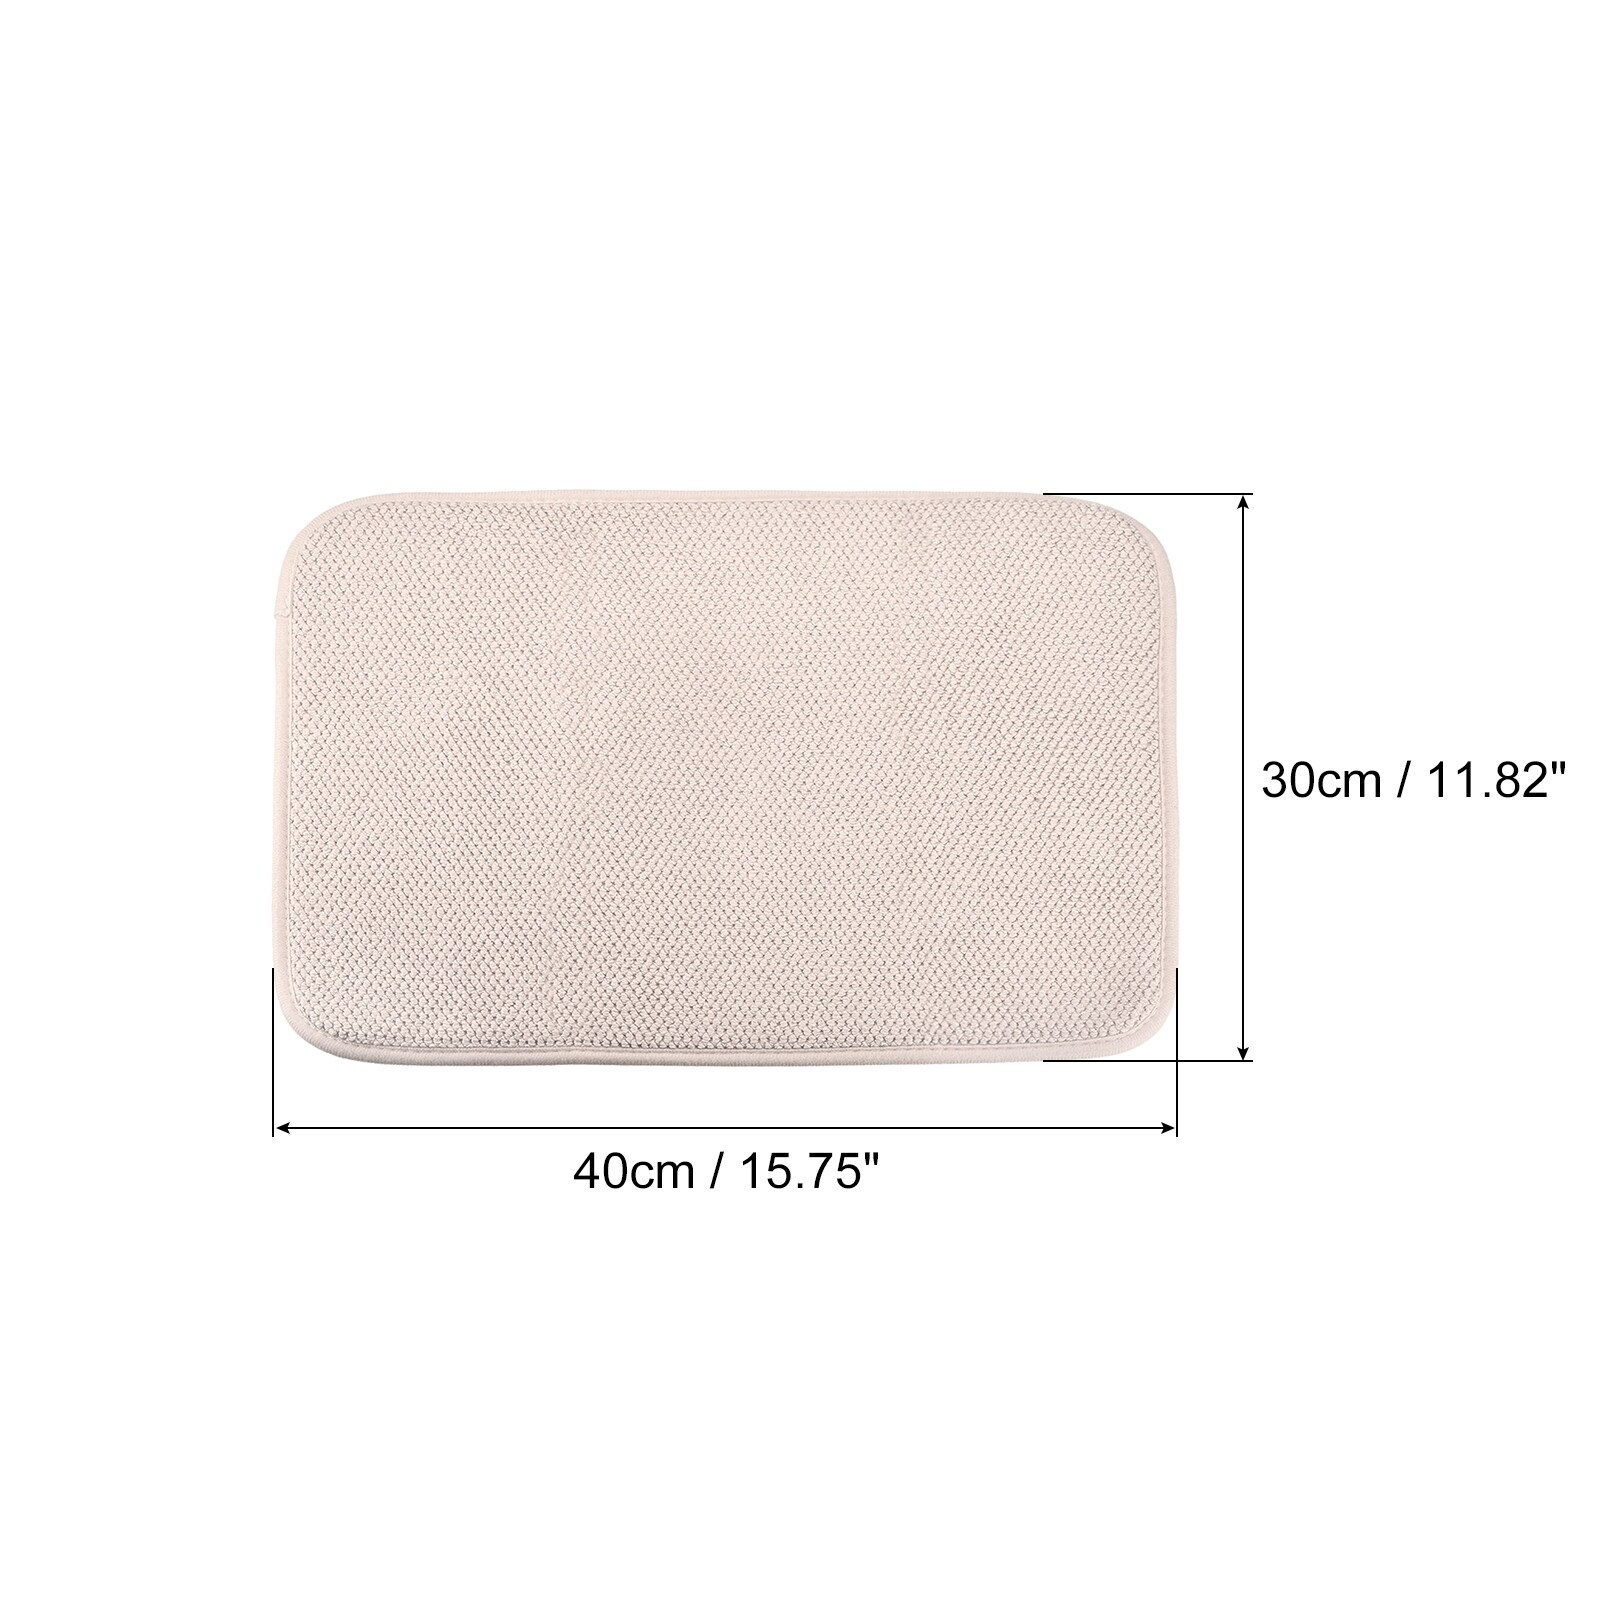 https://ak1.ostkcdn.com/images/products/is/images/direct/50bb2977e4af257b70913c7bb493e23df72d6a97/Microfiber-Dish-Drying-Mat%2C-15.75%22-x-11.82%22-Dishes-Drainer-Mats-Red.jpg